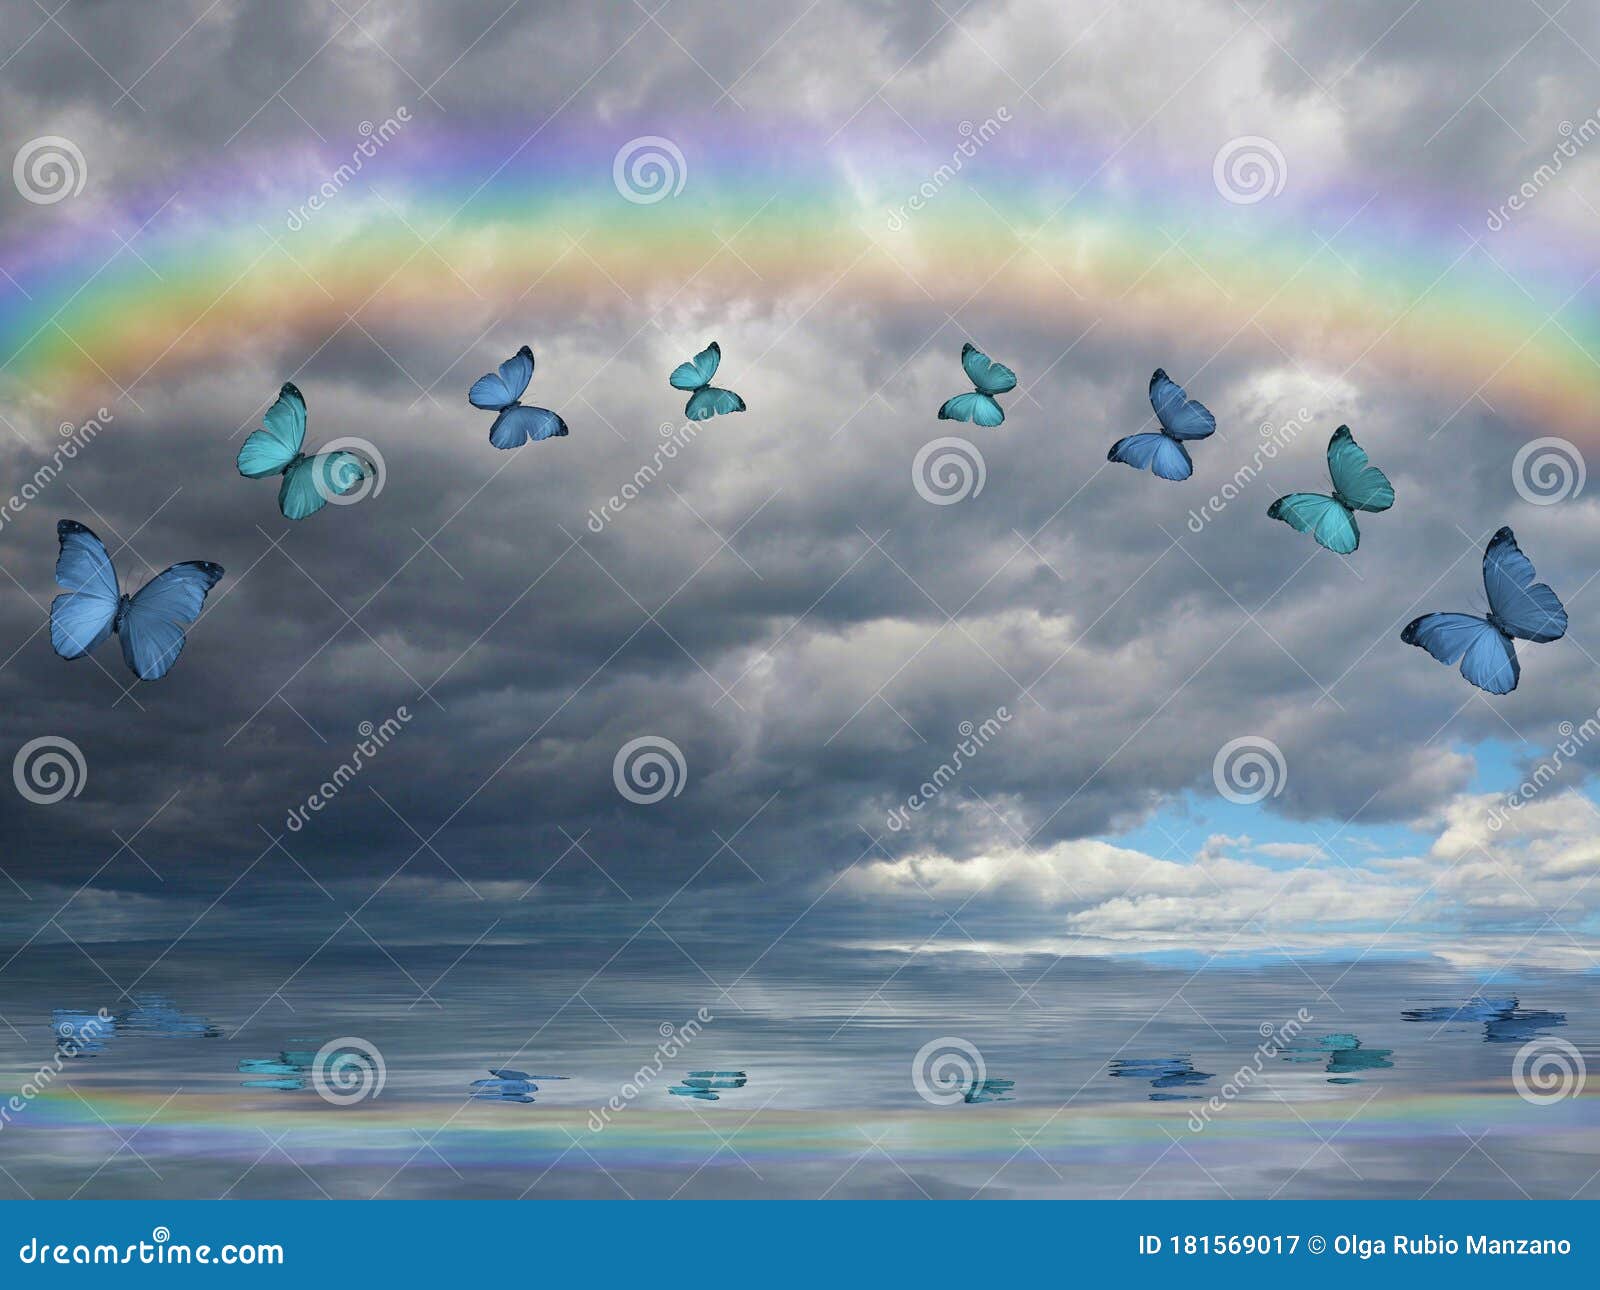 natural background with rainbow in sea reflection